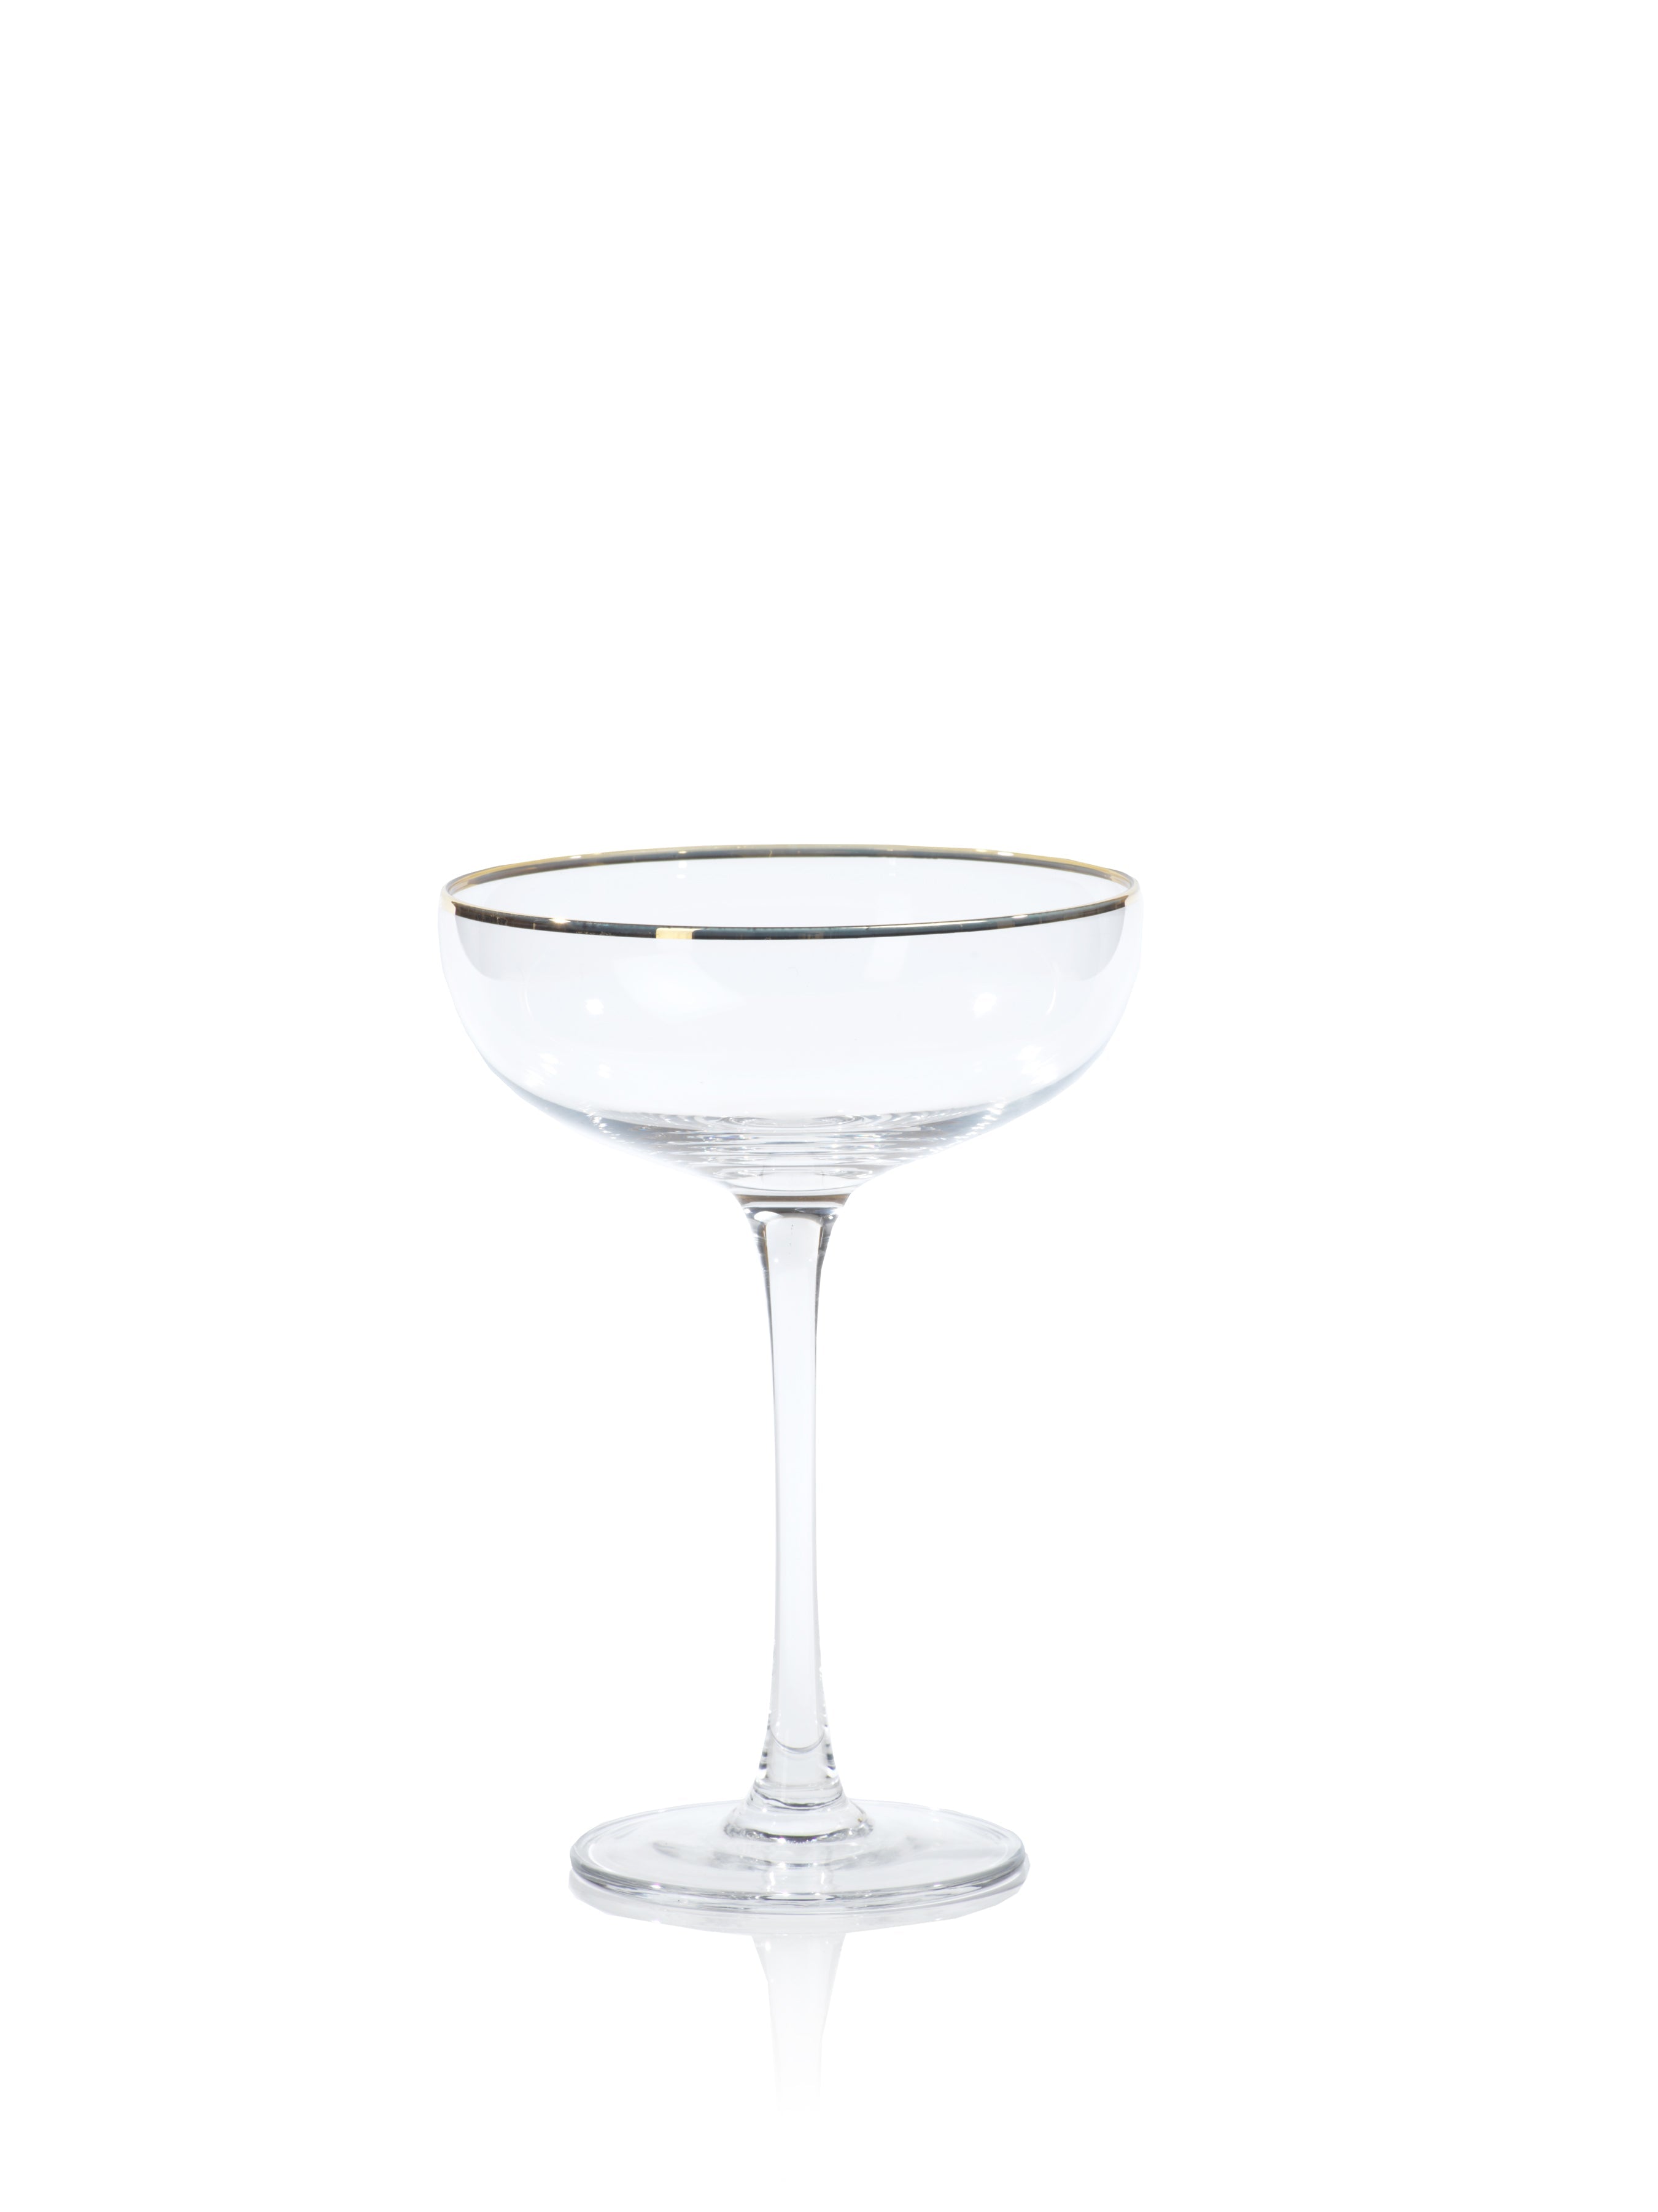 Terrell Bamboo Stem Martini Glasses Set of 4 by Zodax